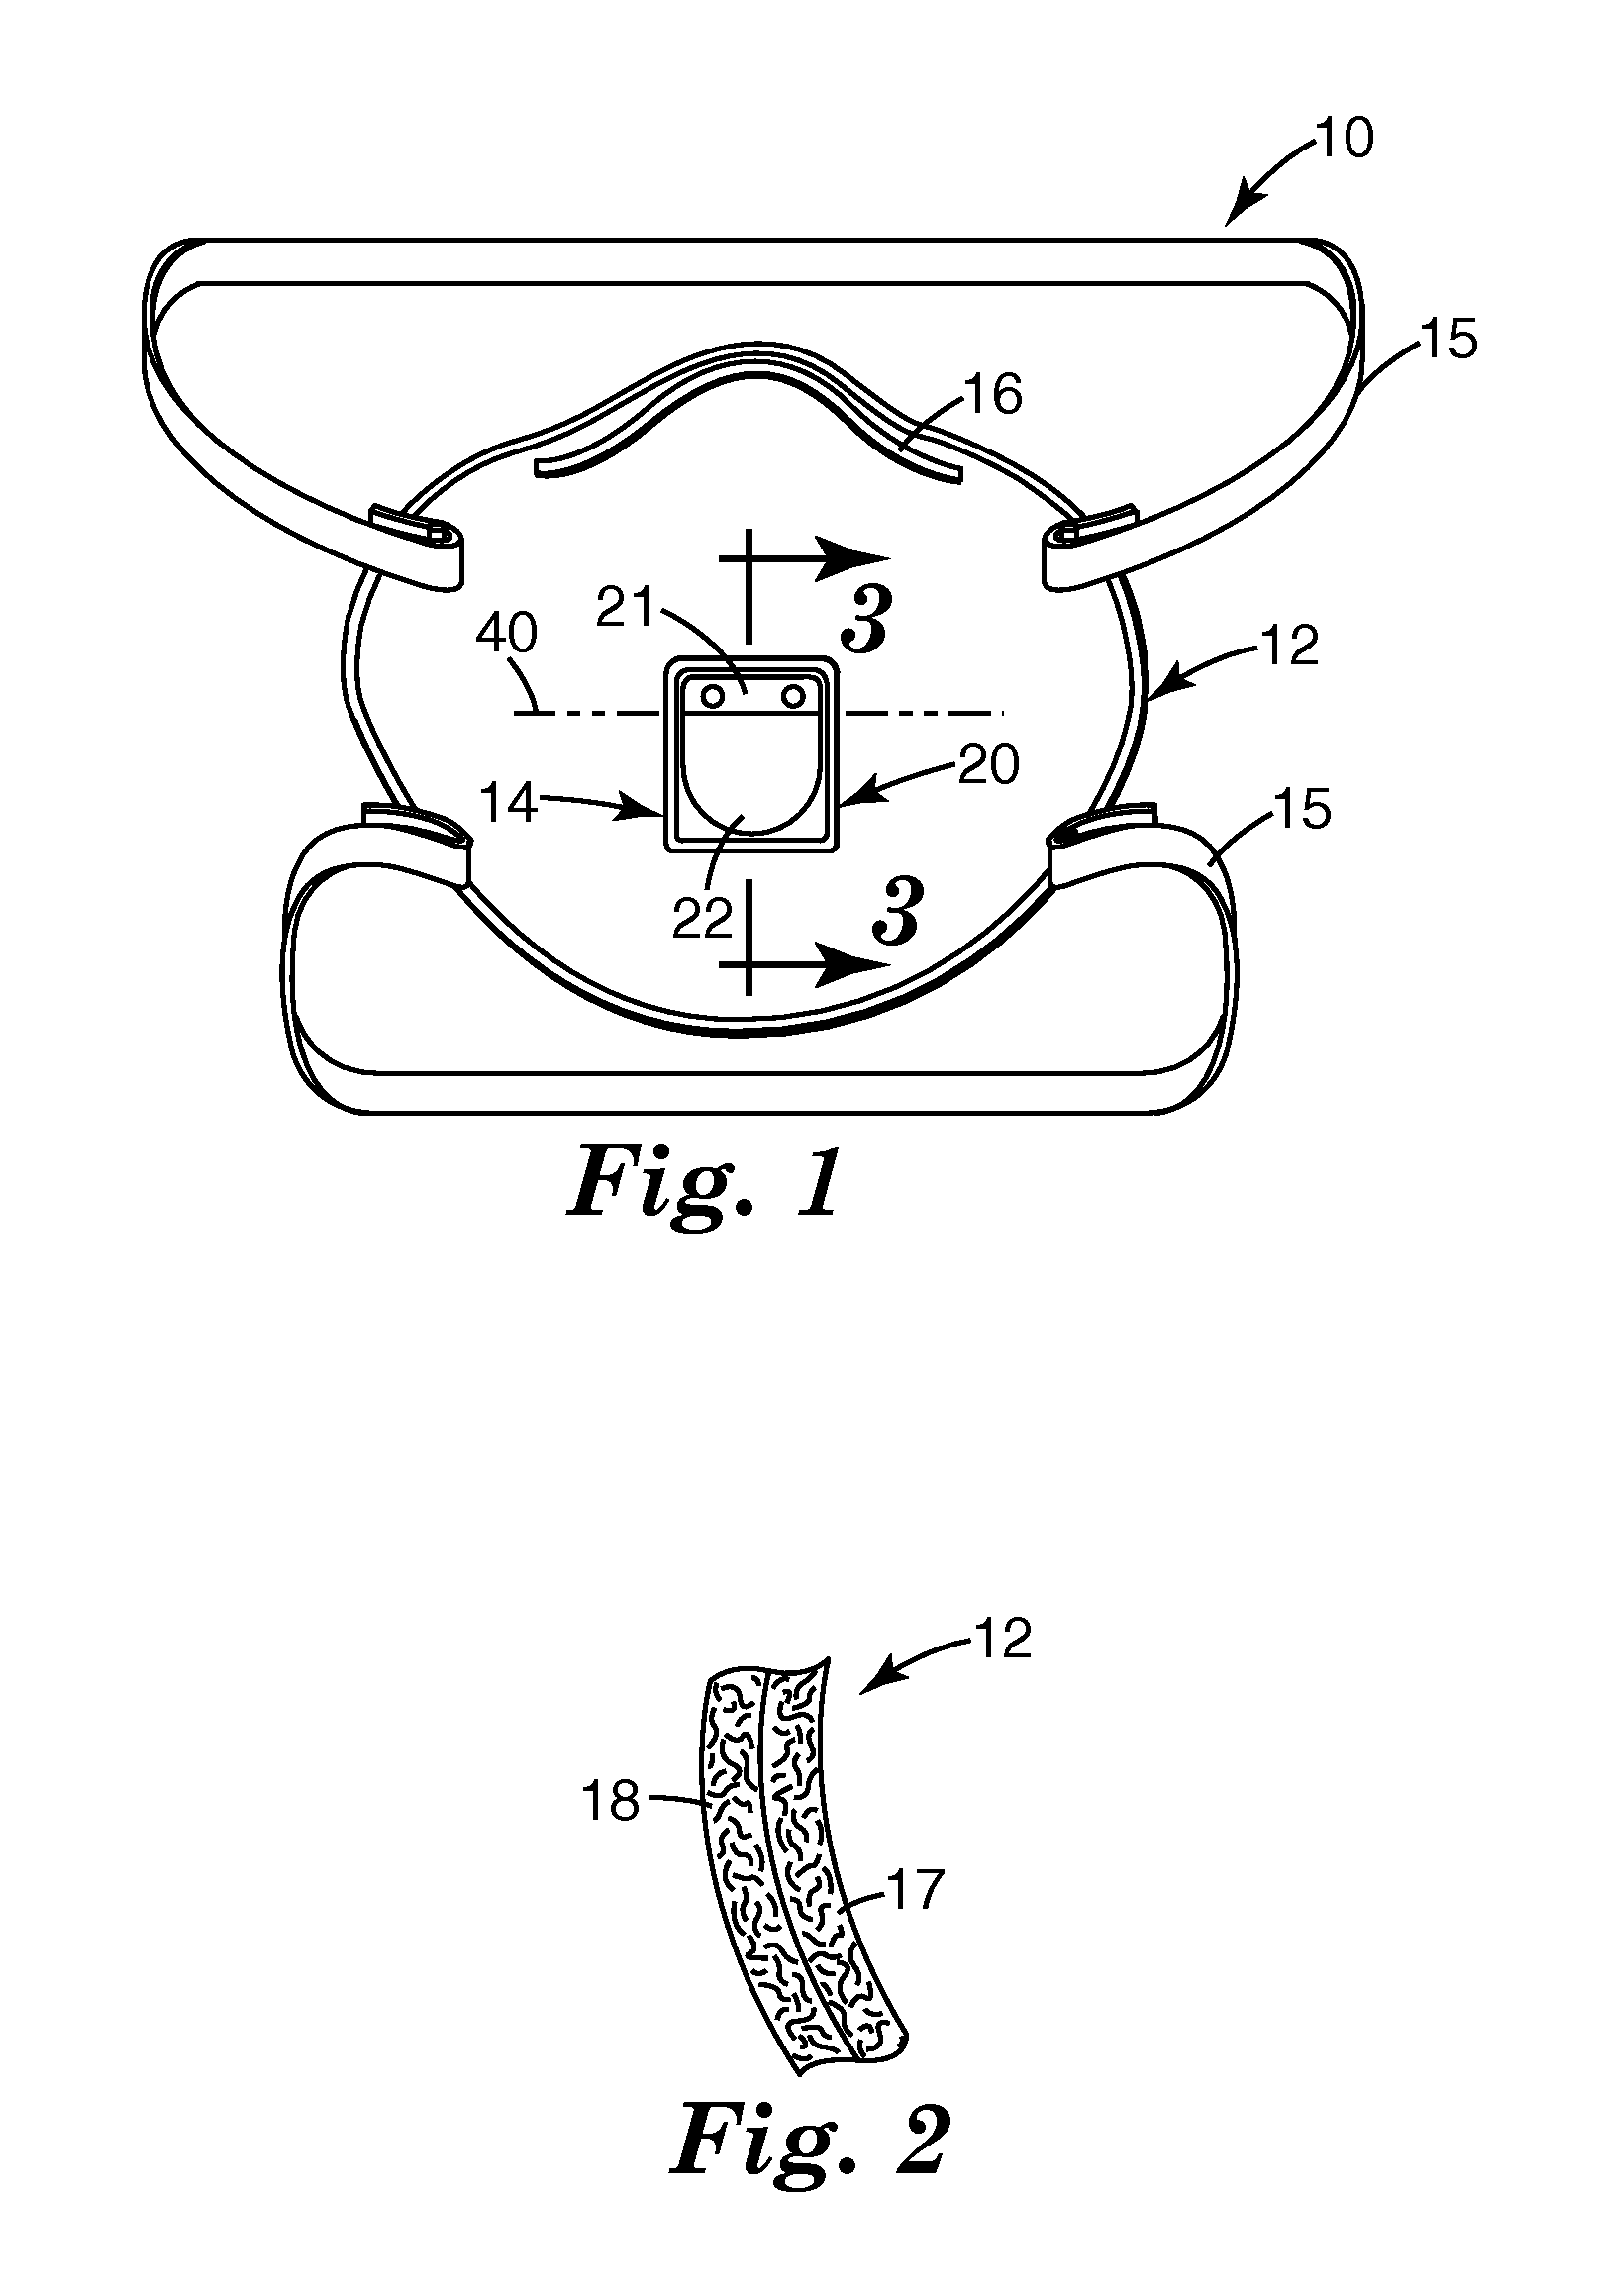 Filtering Face Mask with a Unidirectional Valve Having a Stiff Unbiased Flexible Flap